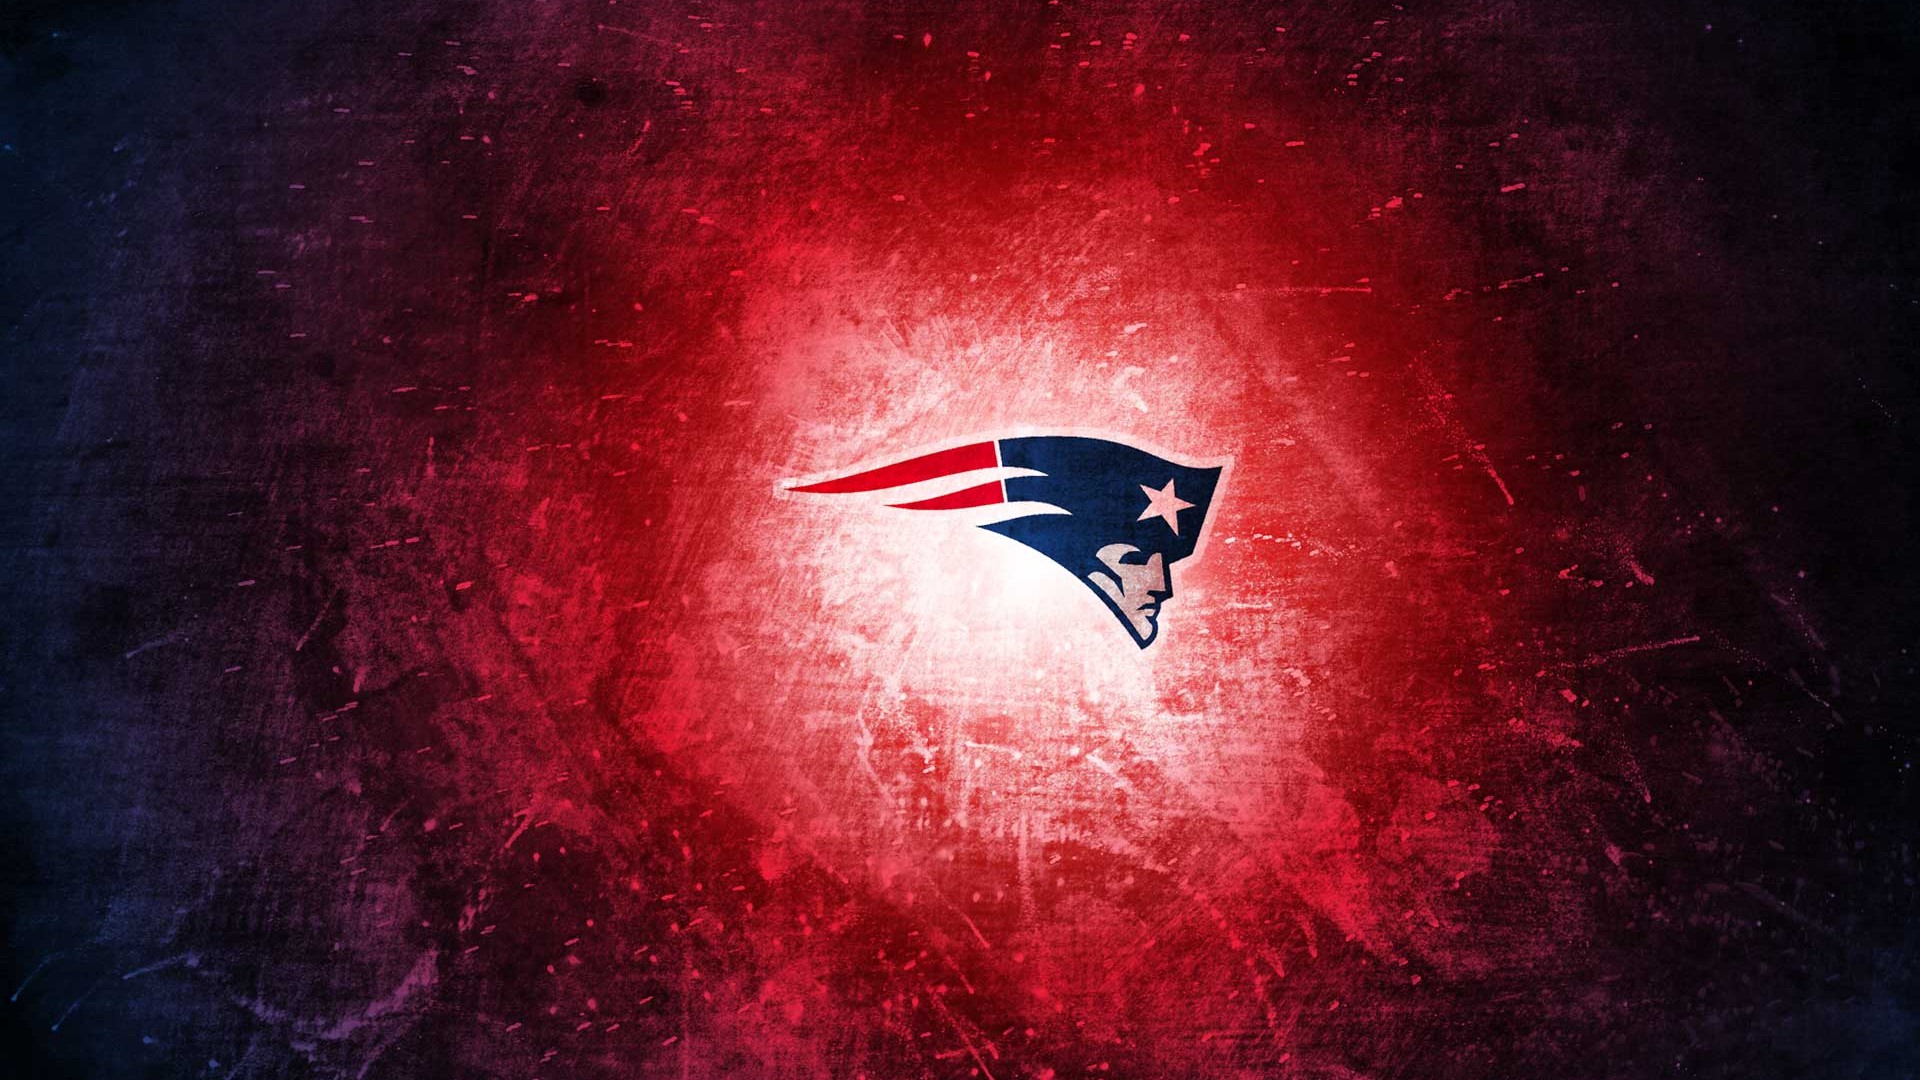 Patriots Wallpaper For Mac Backgrounds with resolution 1920x1080 pixel. You can make this wallpaper for your Mac or Windows Desktop Background, iPhone, Android or Tablet and another Smartphone device